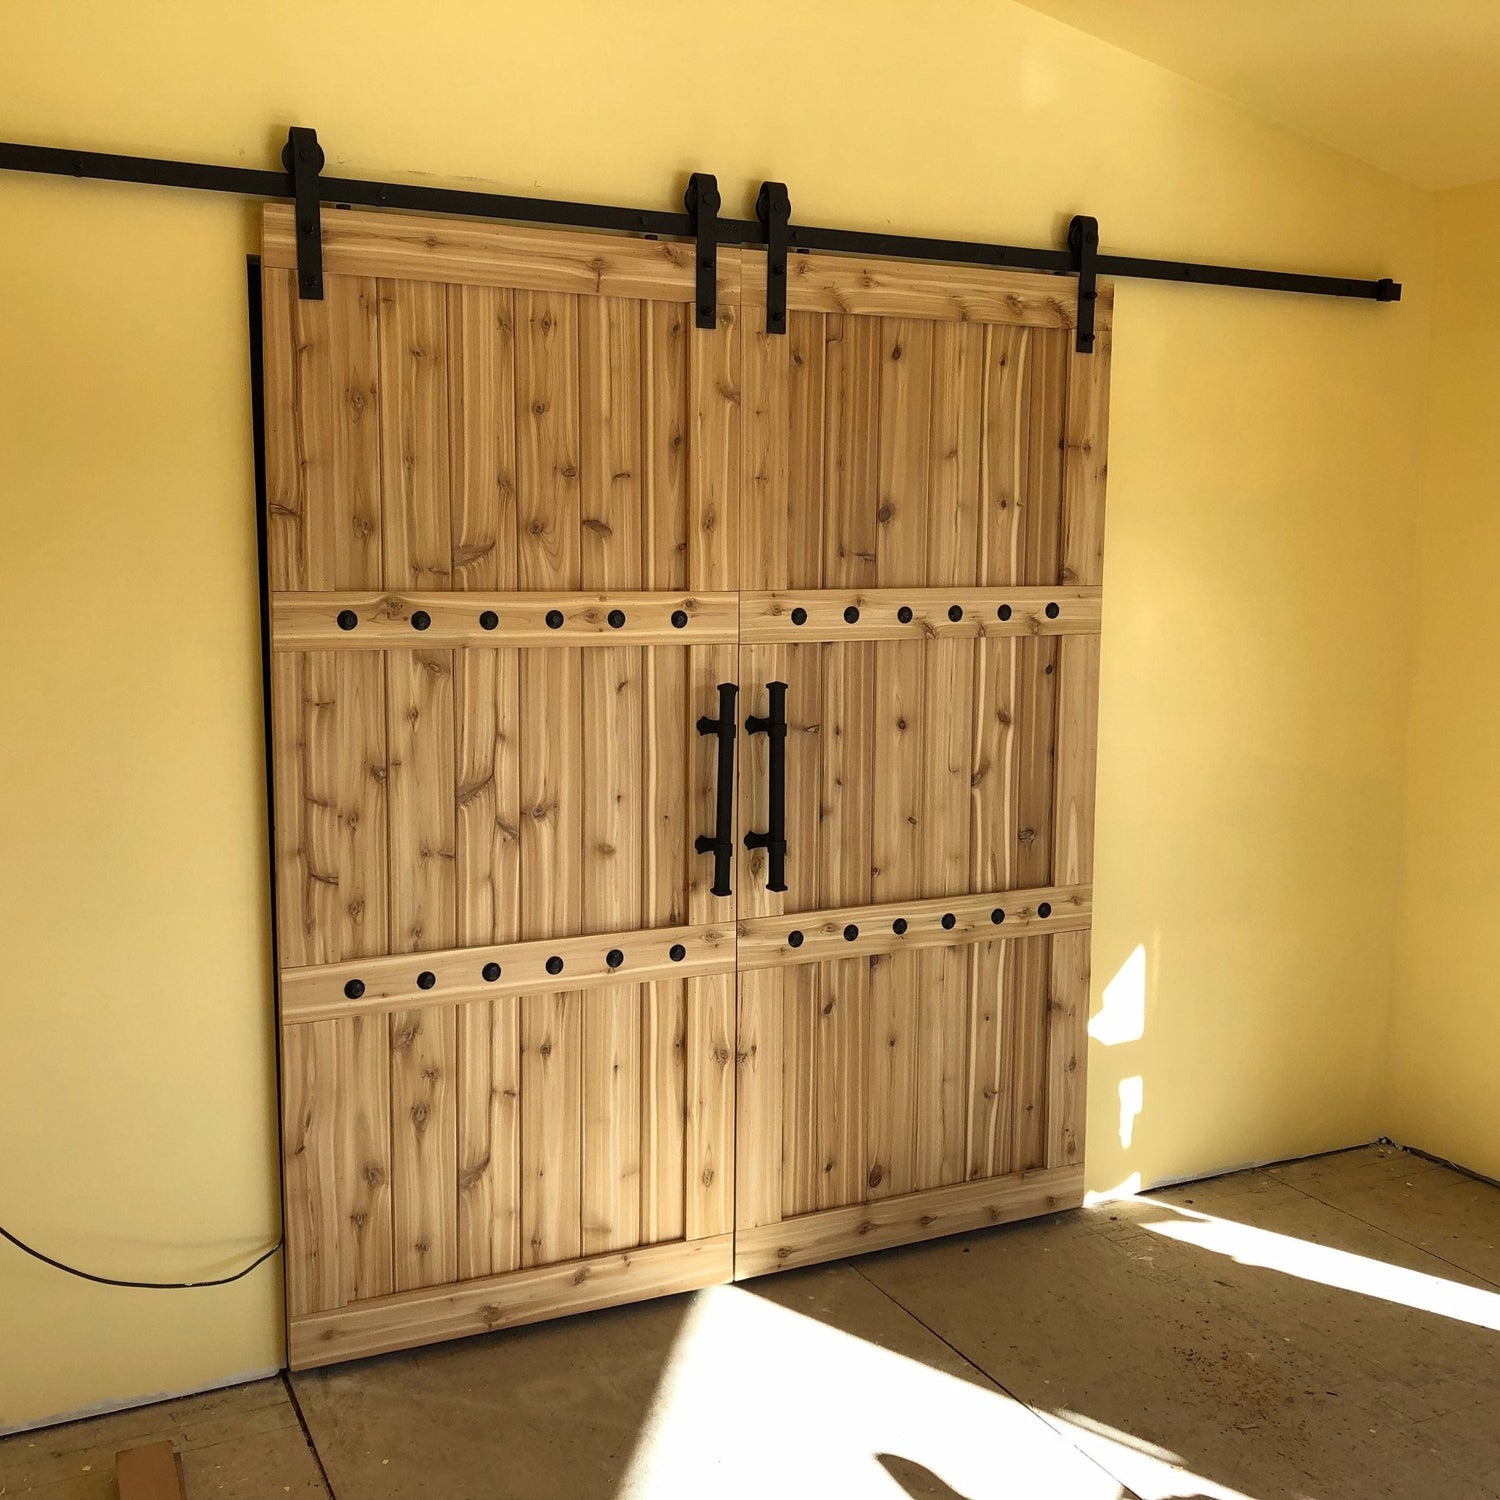 Room with a Custom Double Horizon Barn Door with two wooden panels